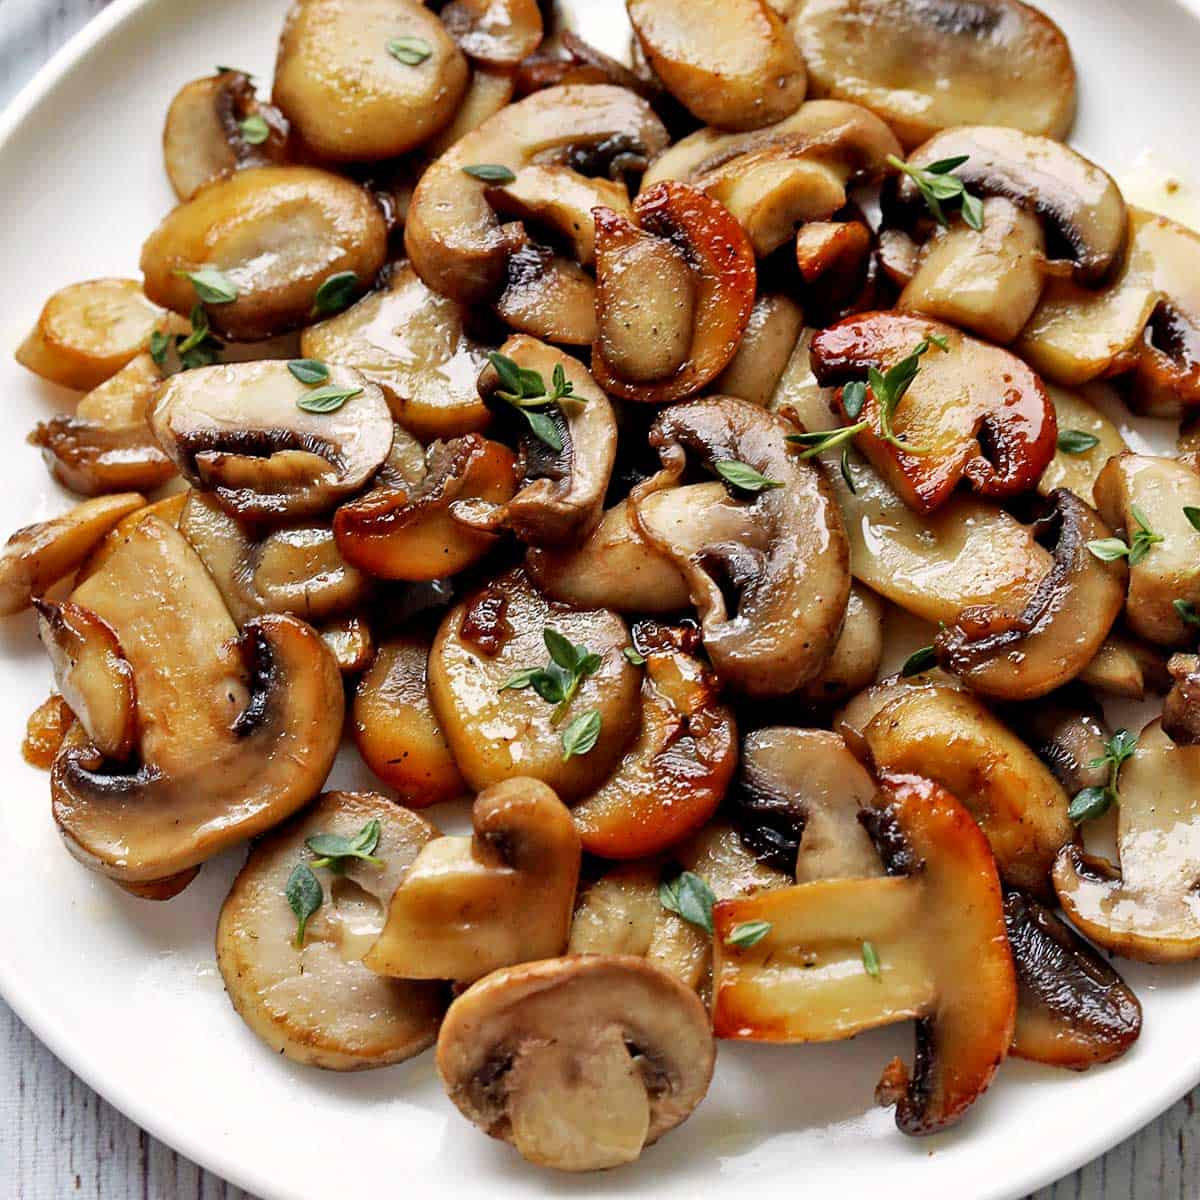 How To Clean Mushrooms: A Step-By-Step Guide